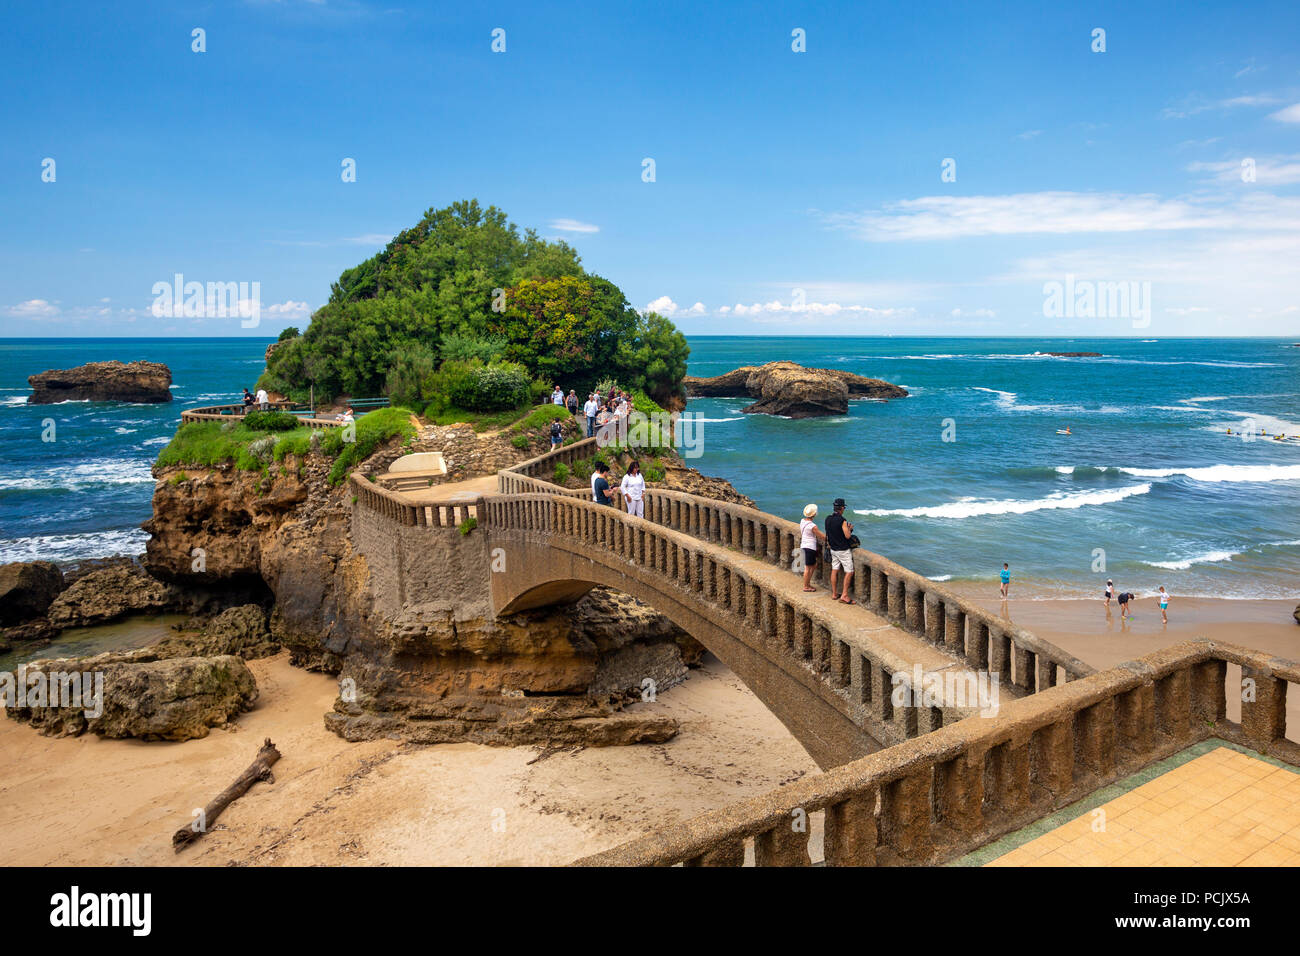 The rock of 'la Basta', at Biarritz (Aquitaine - France). This rock has been laid out as a walk between the Biarritz big beach and its harbour. Stock Photo